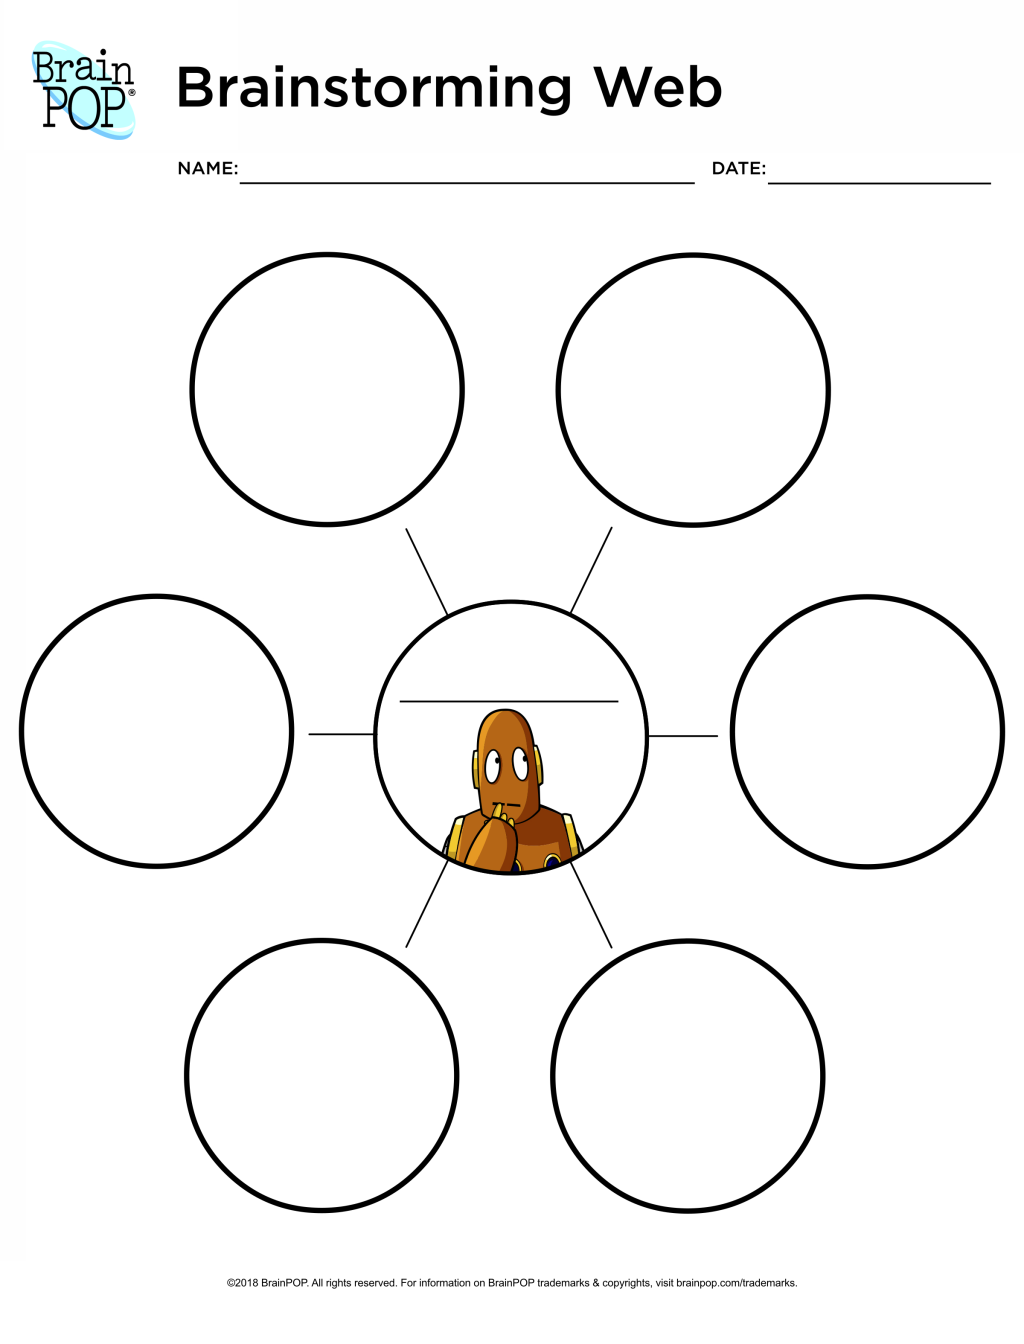 Picture of: Fall of the Roman Empire Lesson Plans and Lesson Ideas  BrainPOP